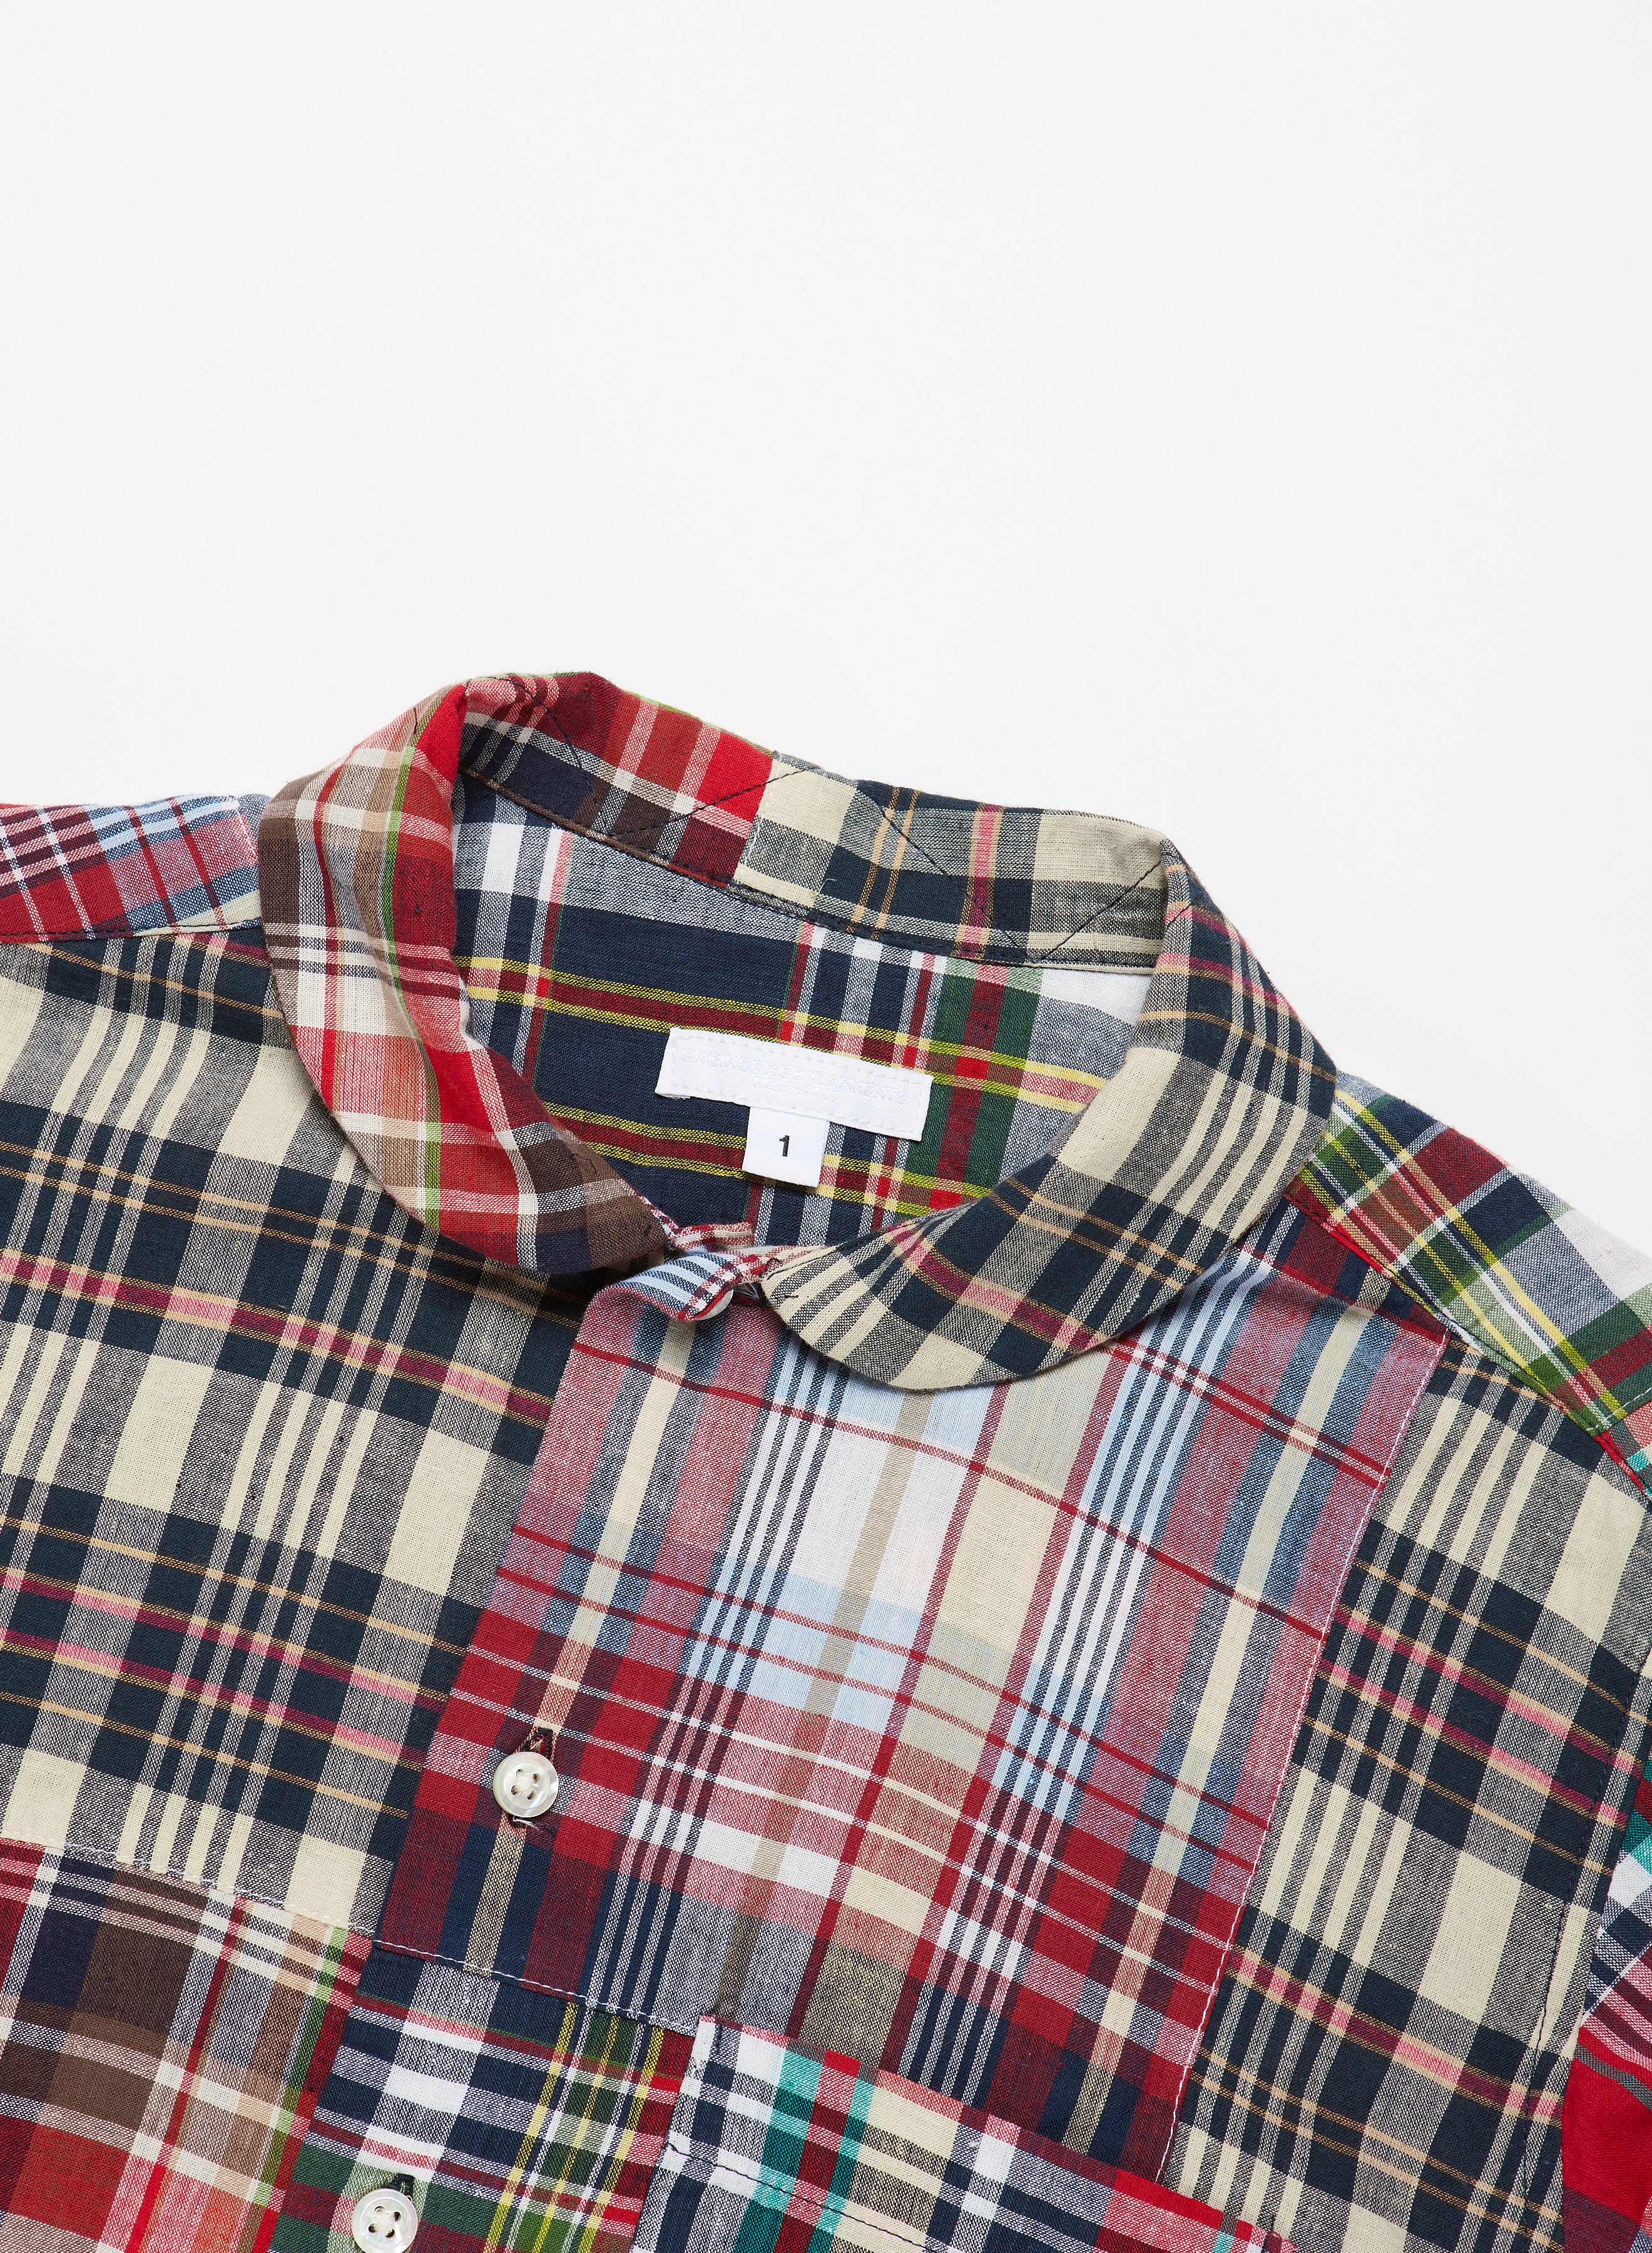 Rounded Collar Shirt - Navy Square Patchwork Madras